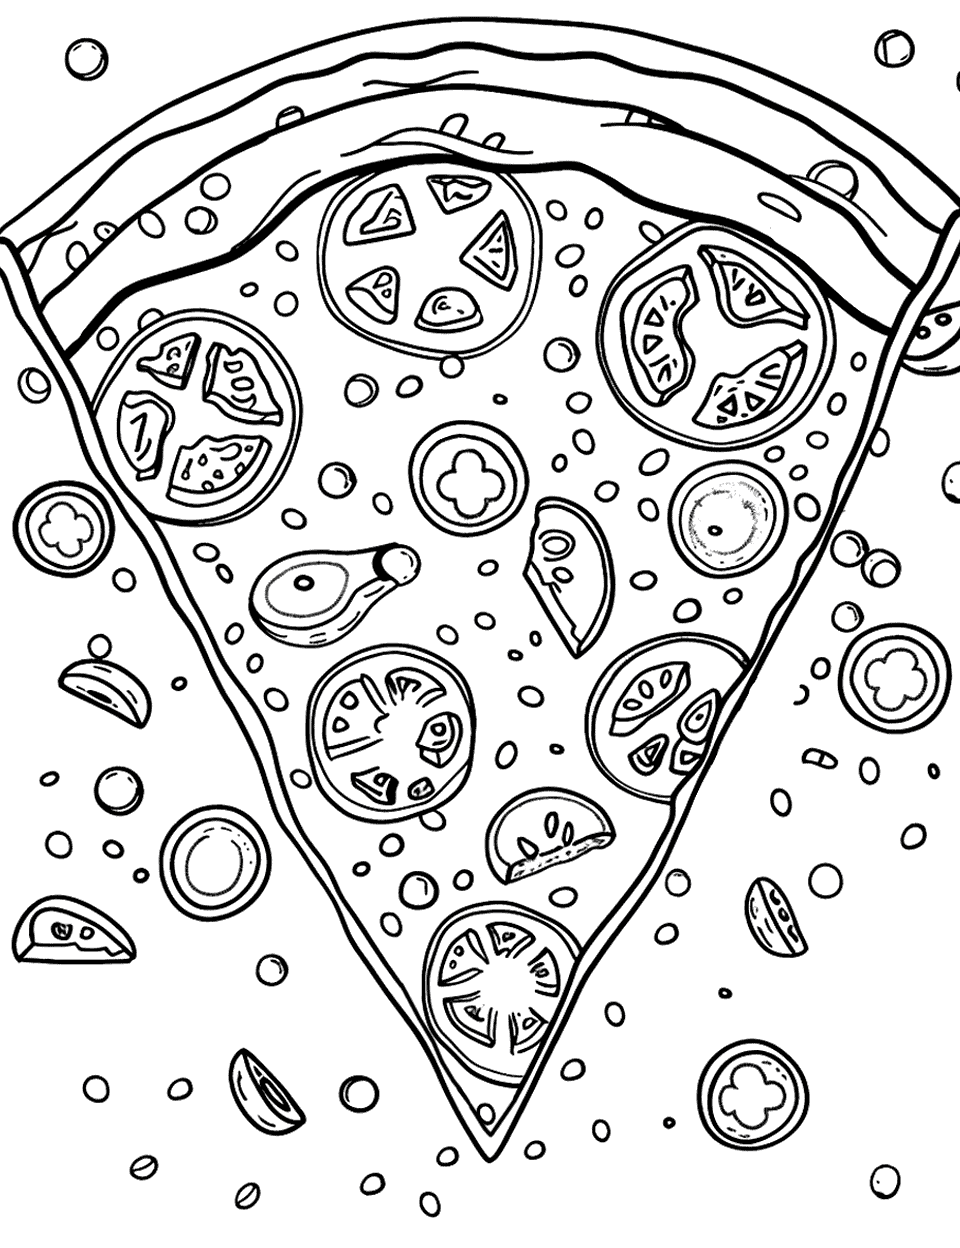 Pizza Slice Paradise Coloring Page - A large, cheesy pizza slice surrounded by various toppings around.